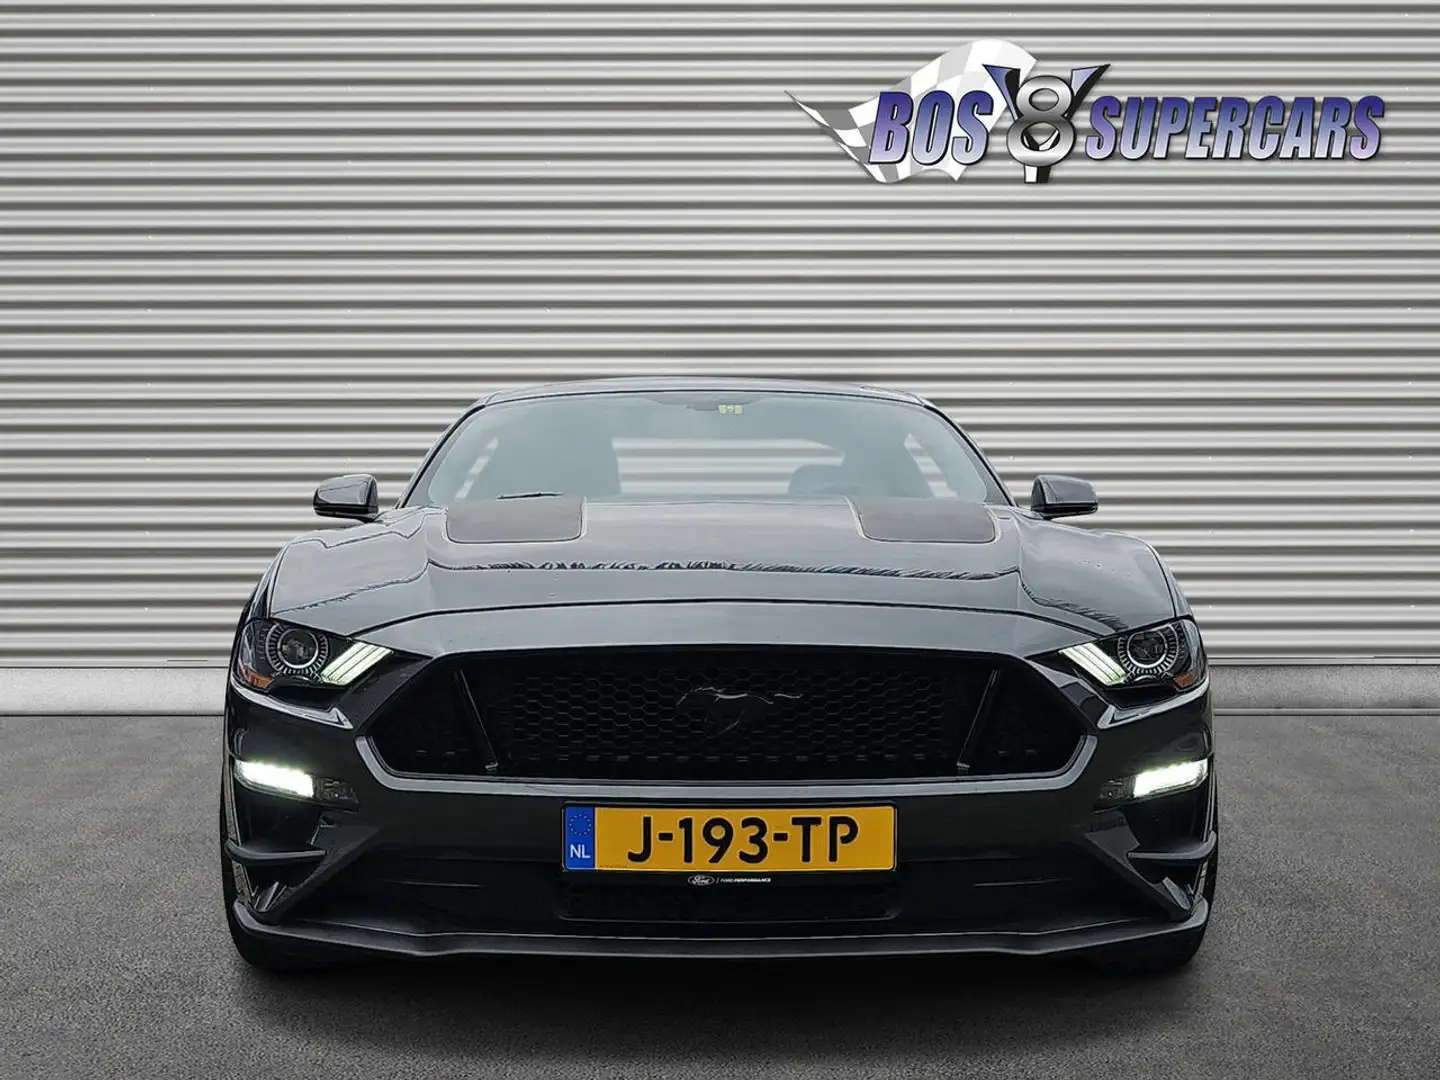 Ford Mustang GT PREMIUM 5.0 V8 SUPERCHARGED 700PK Grijs - 2